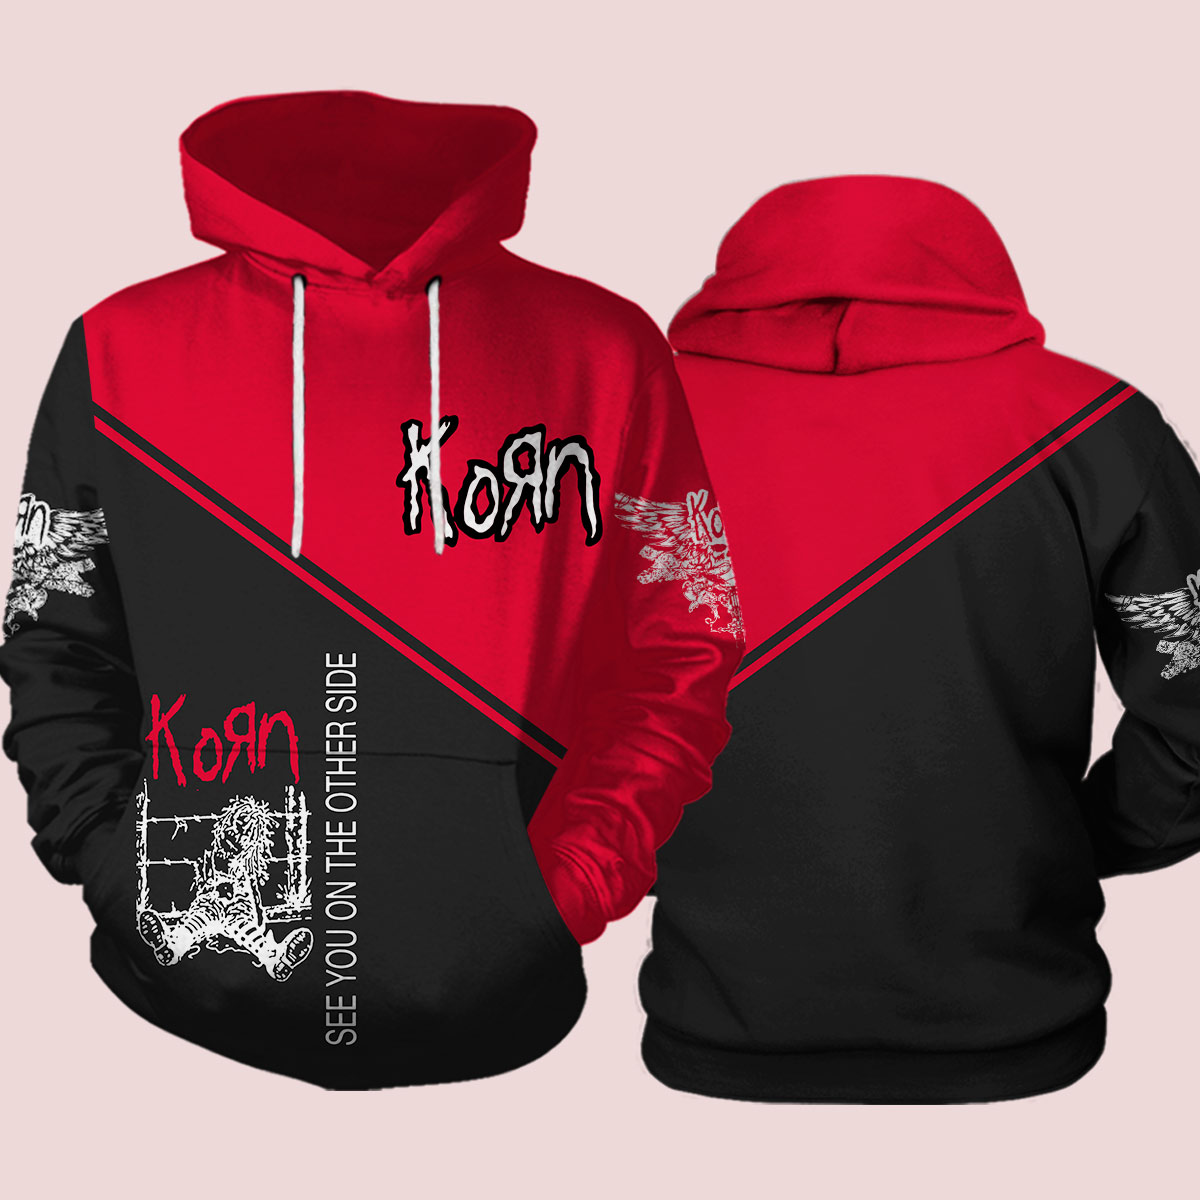 Korn see you on the other side full over printed hoodie